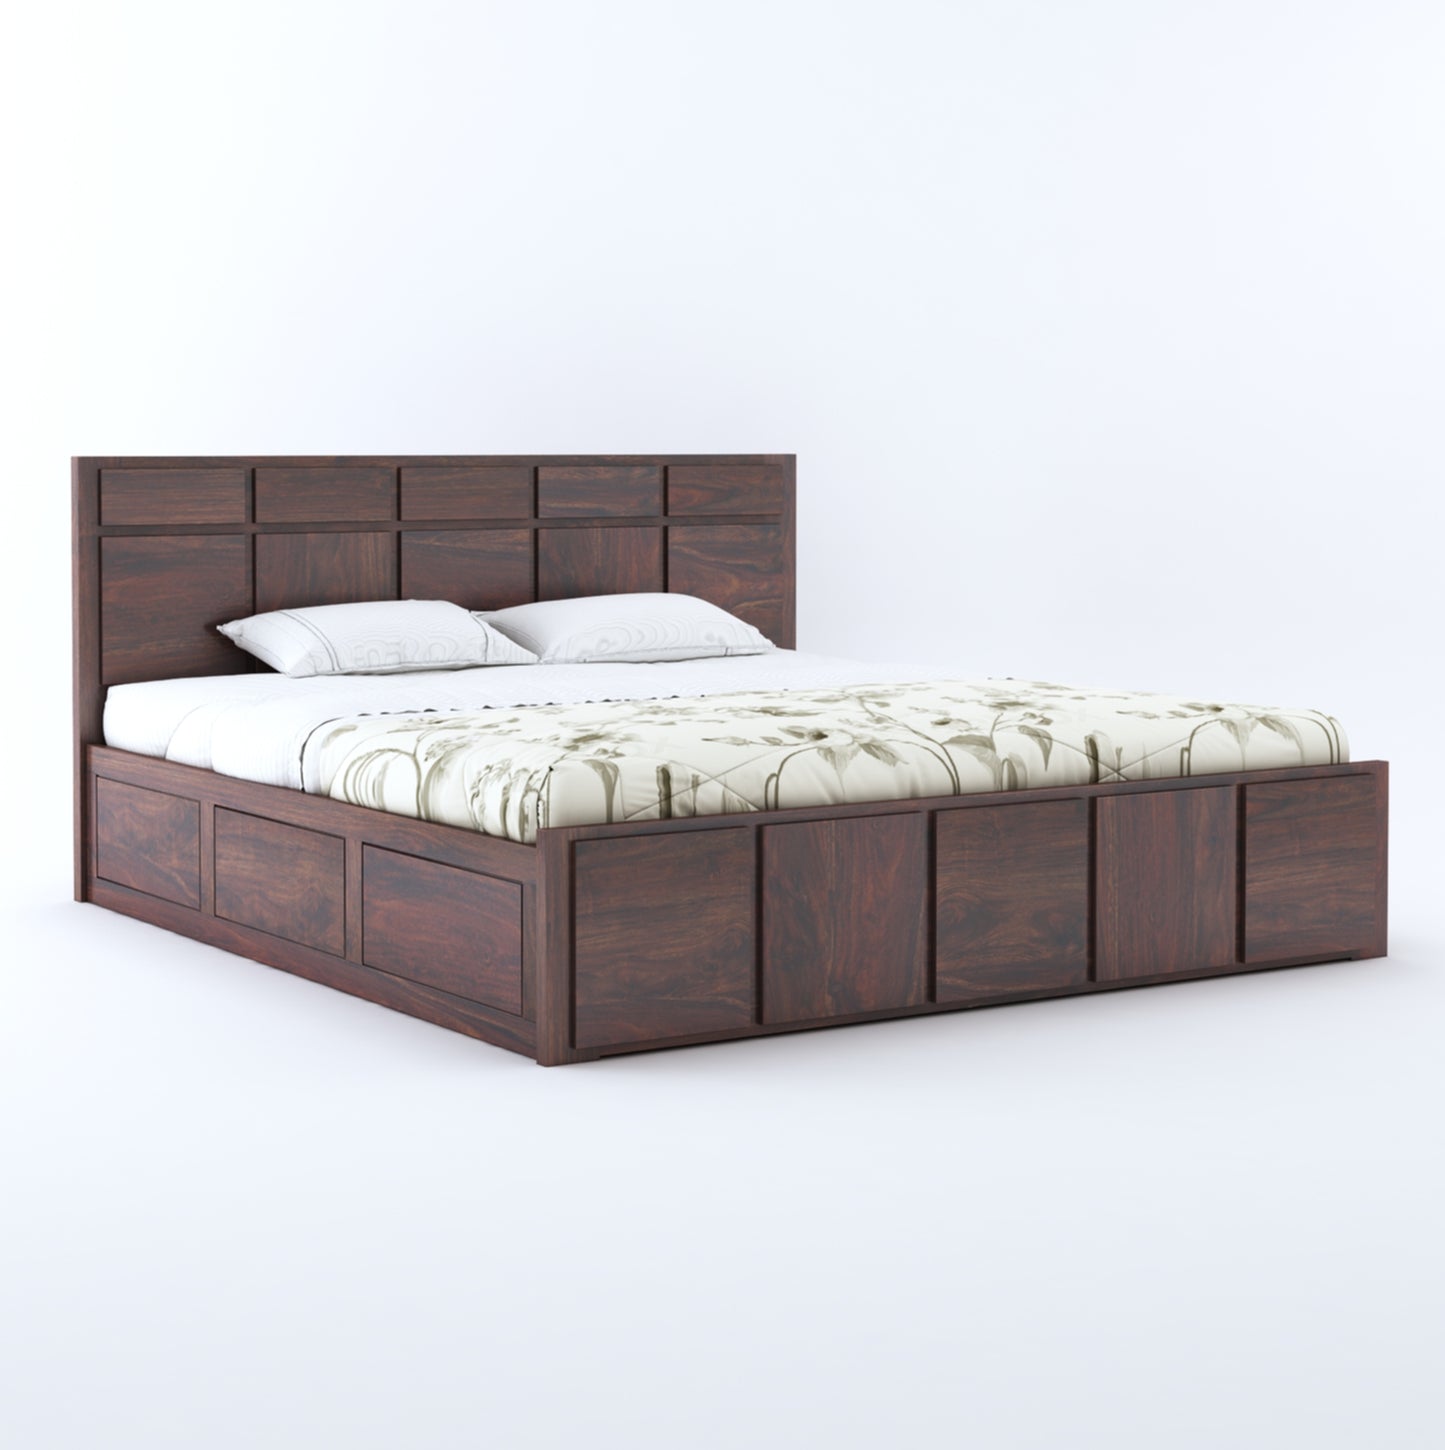 Sheesham Square Design Wooden Double Bed With Box Storage